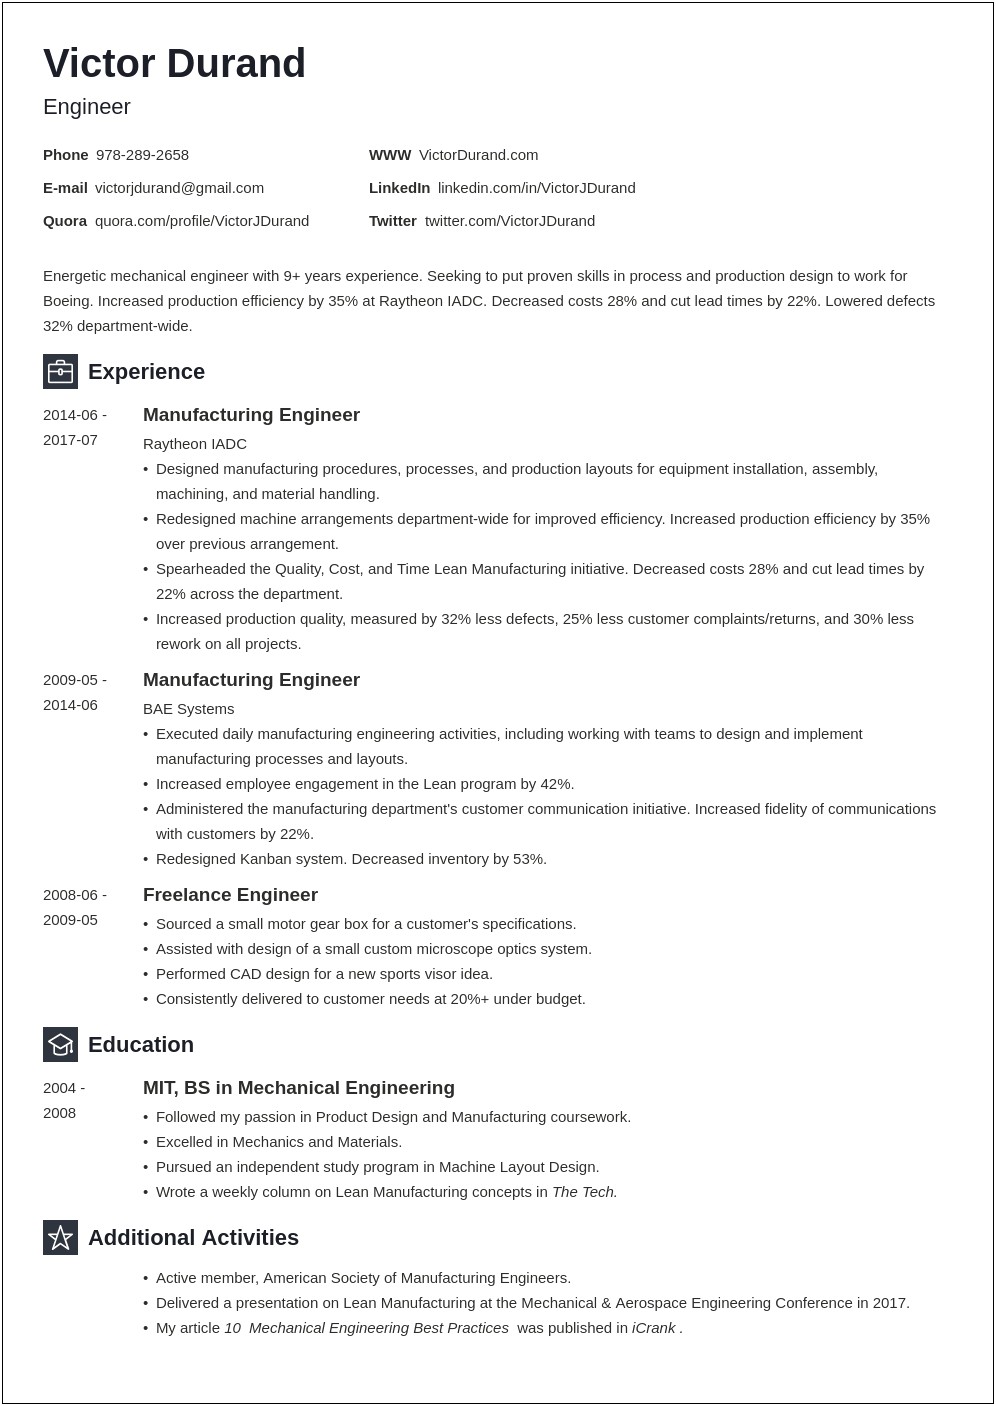 Resume Samples For Freshers Engineers